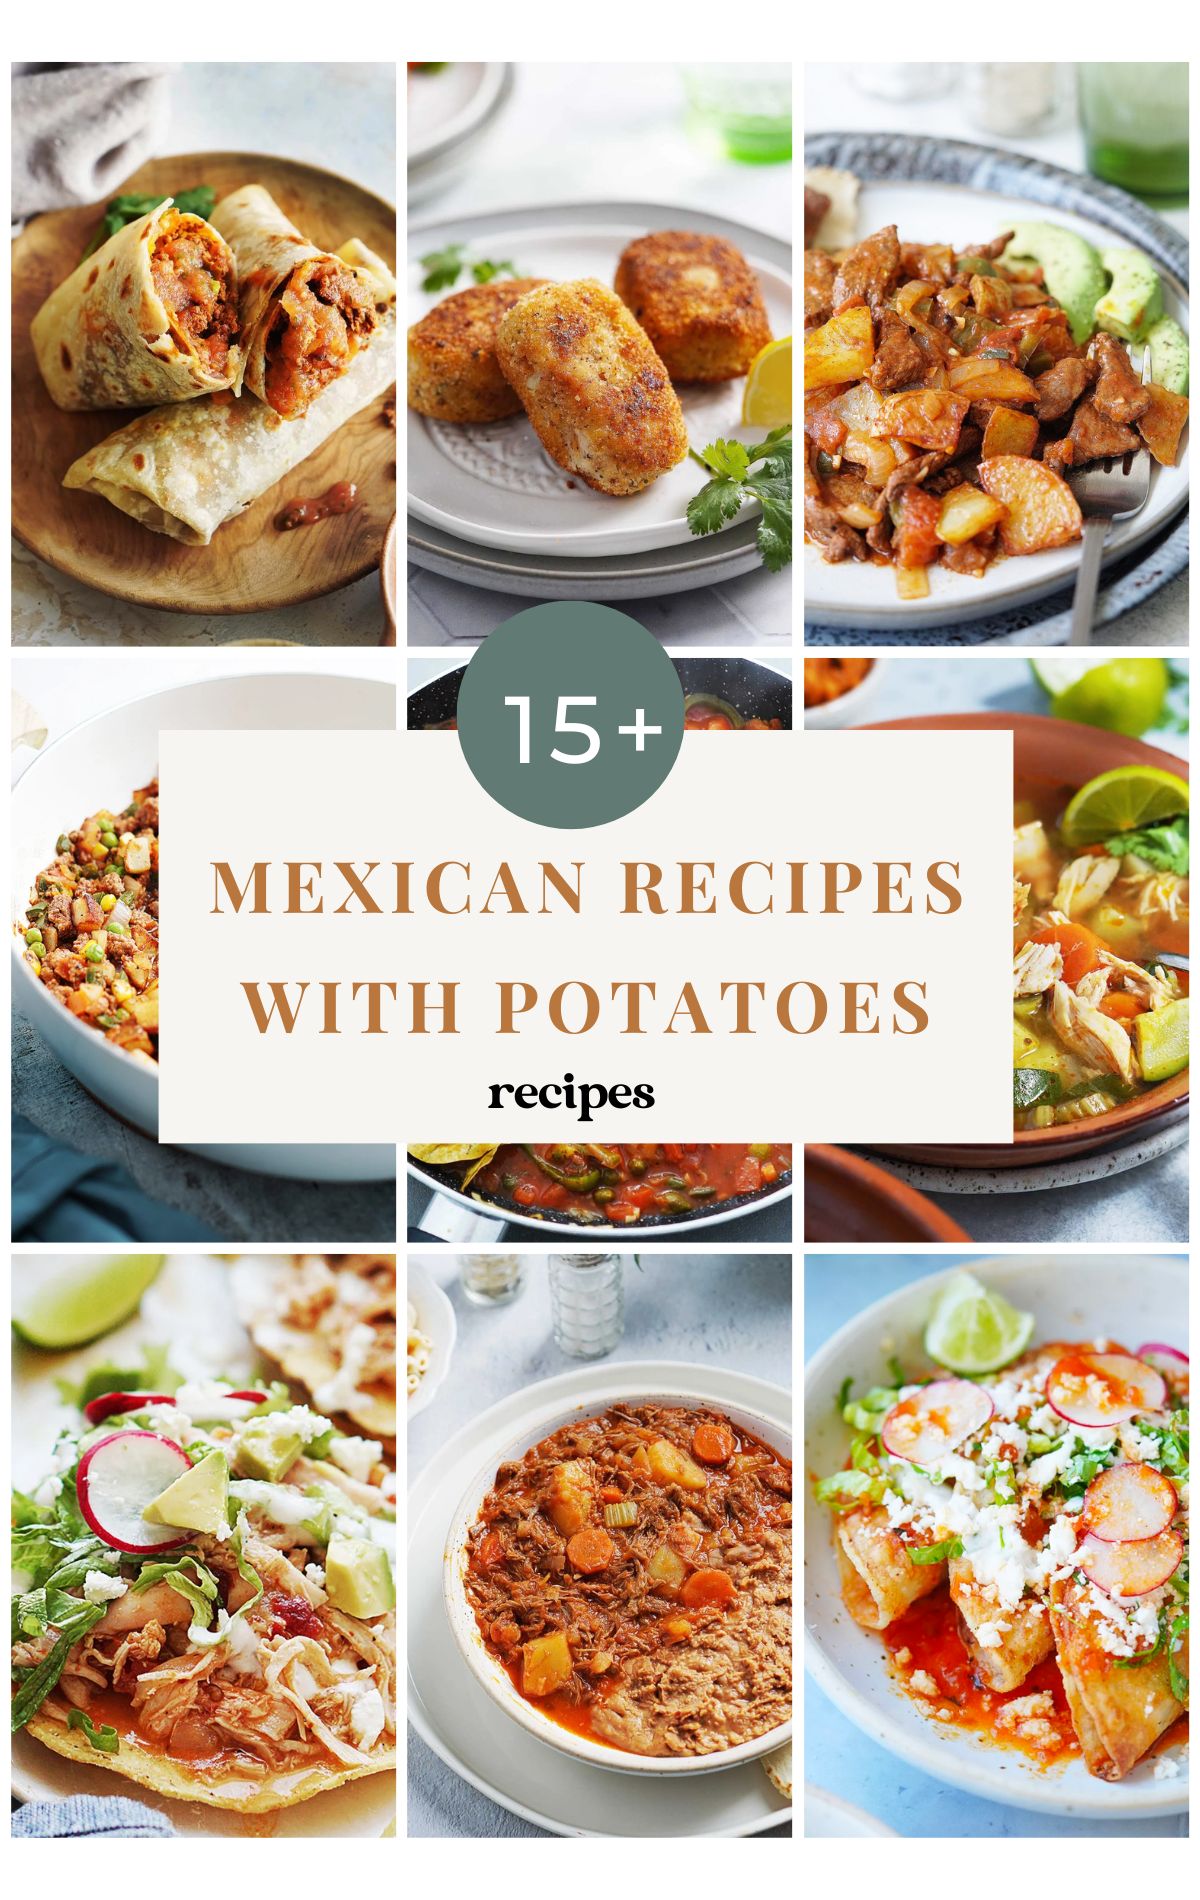 15+ Mexican Recipes With Potatoes